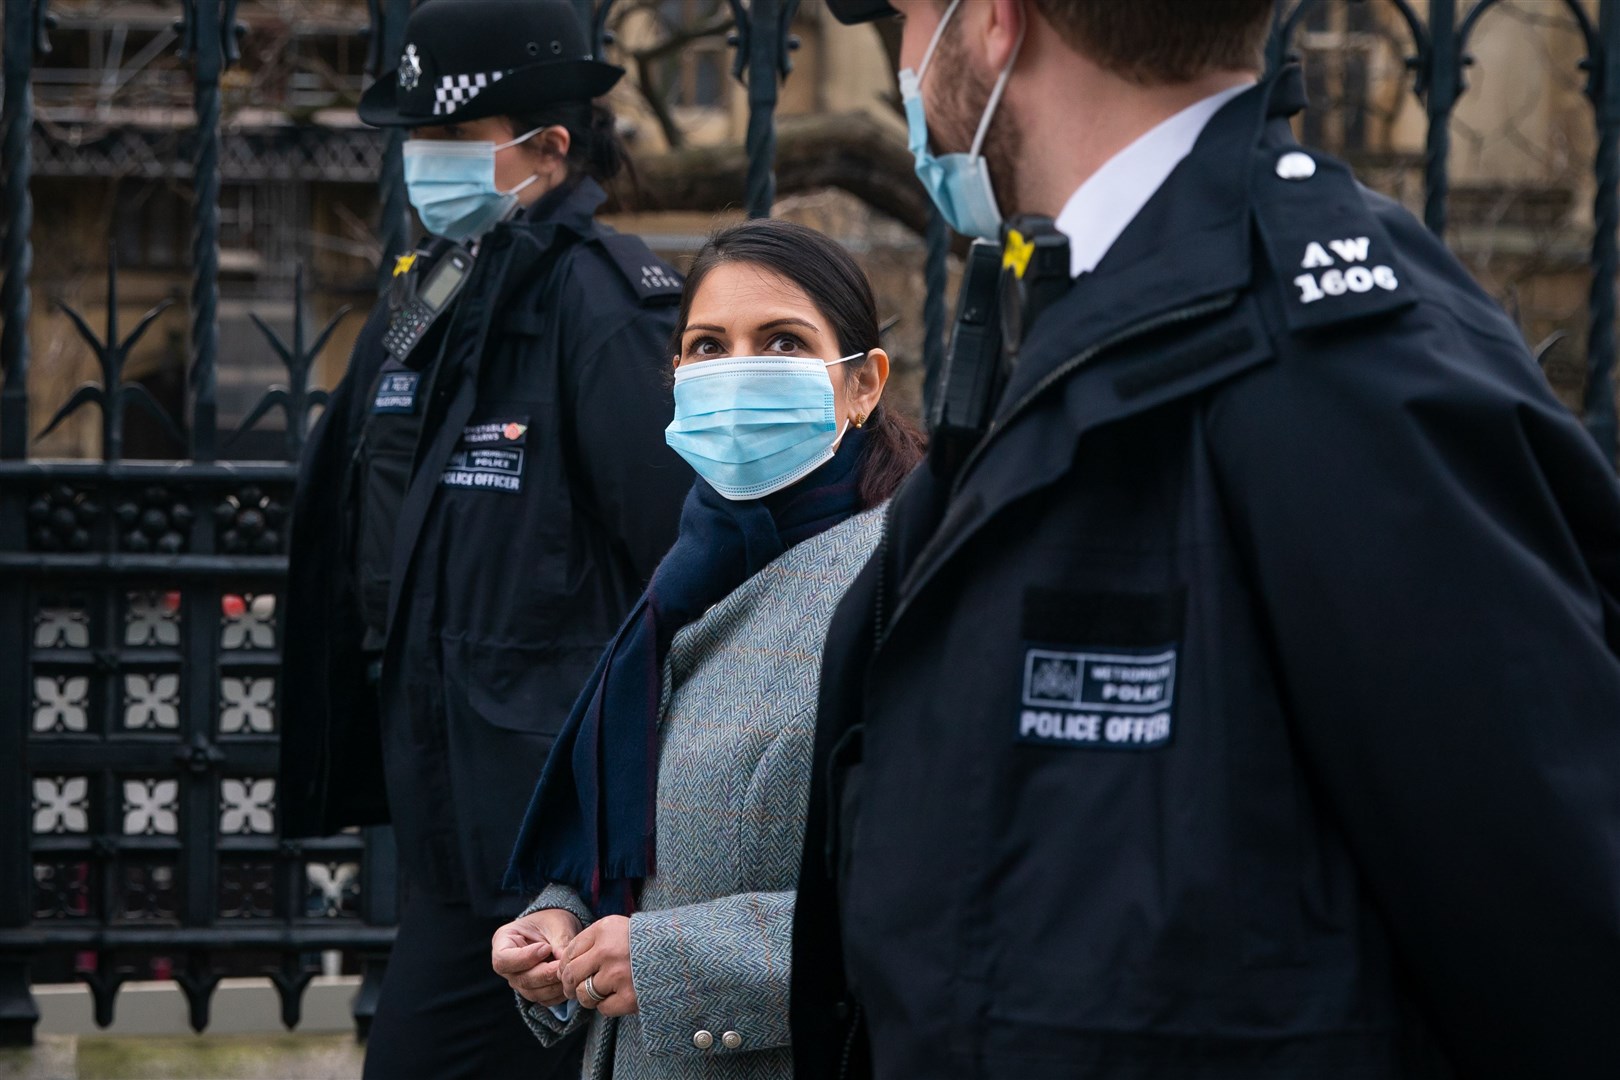 Home Secretary Priti Patel is under pressure to prioritise frontline police officers in the vaccine rollout (Aaron Chown/PA).